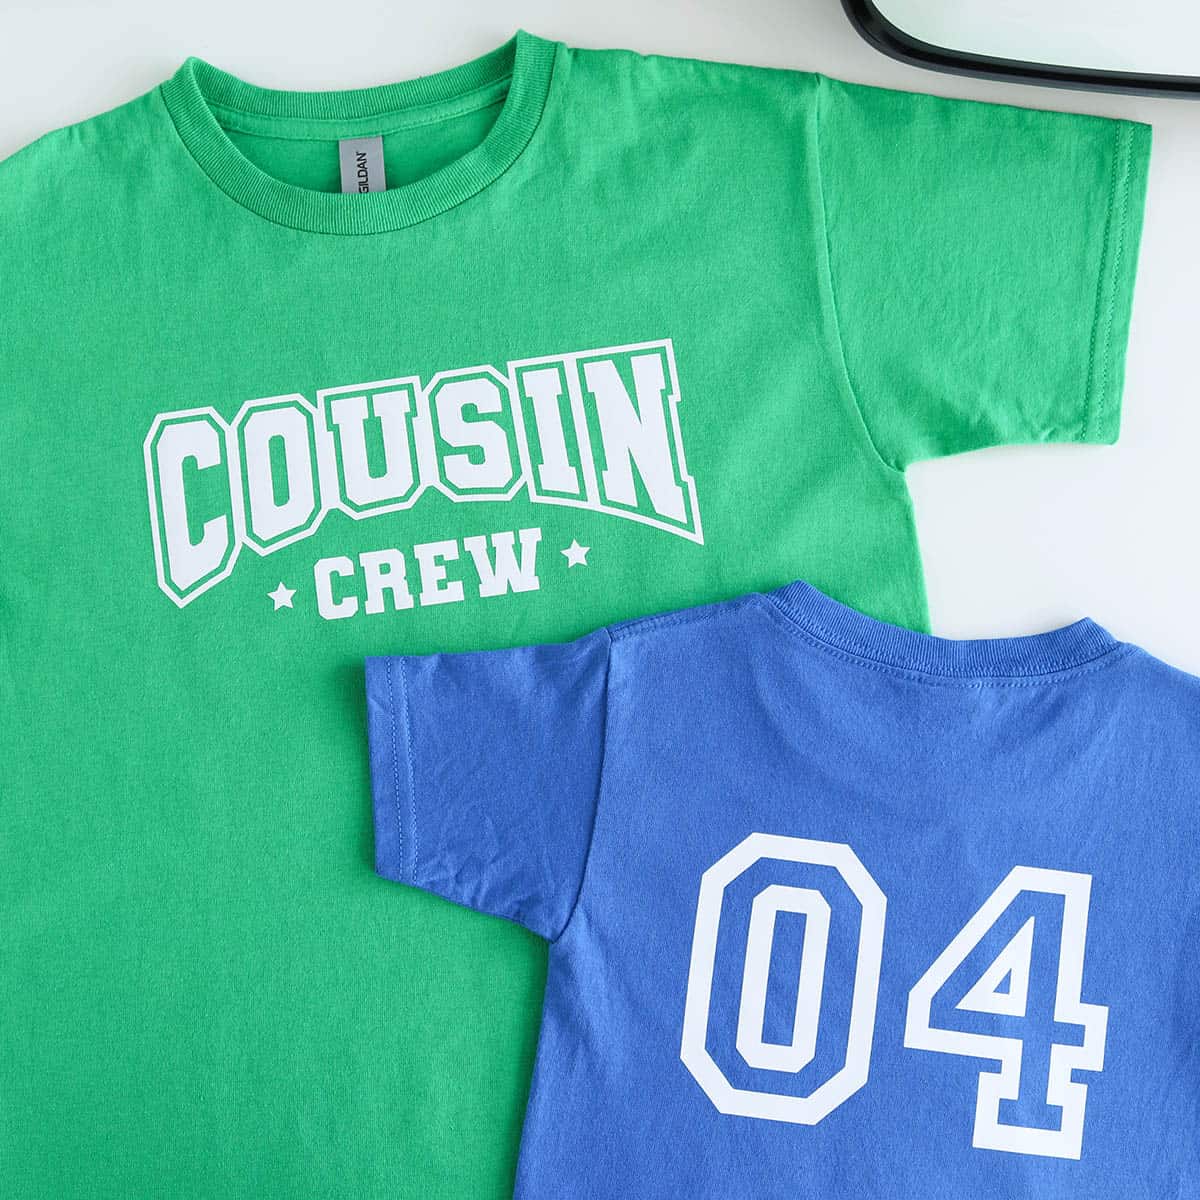 DIY Matching Cousin Crew Shirts For a Family Reunion